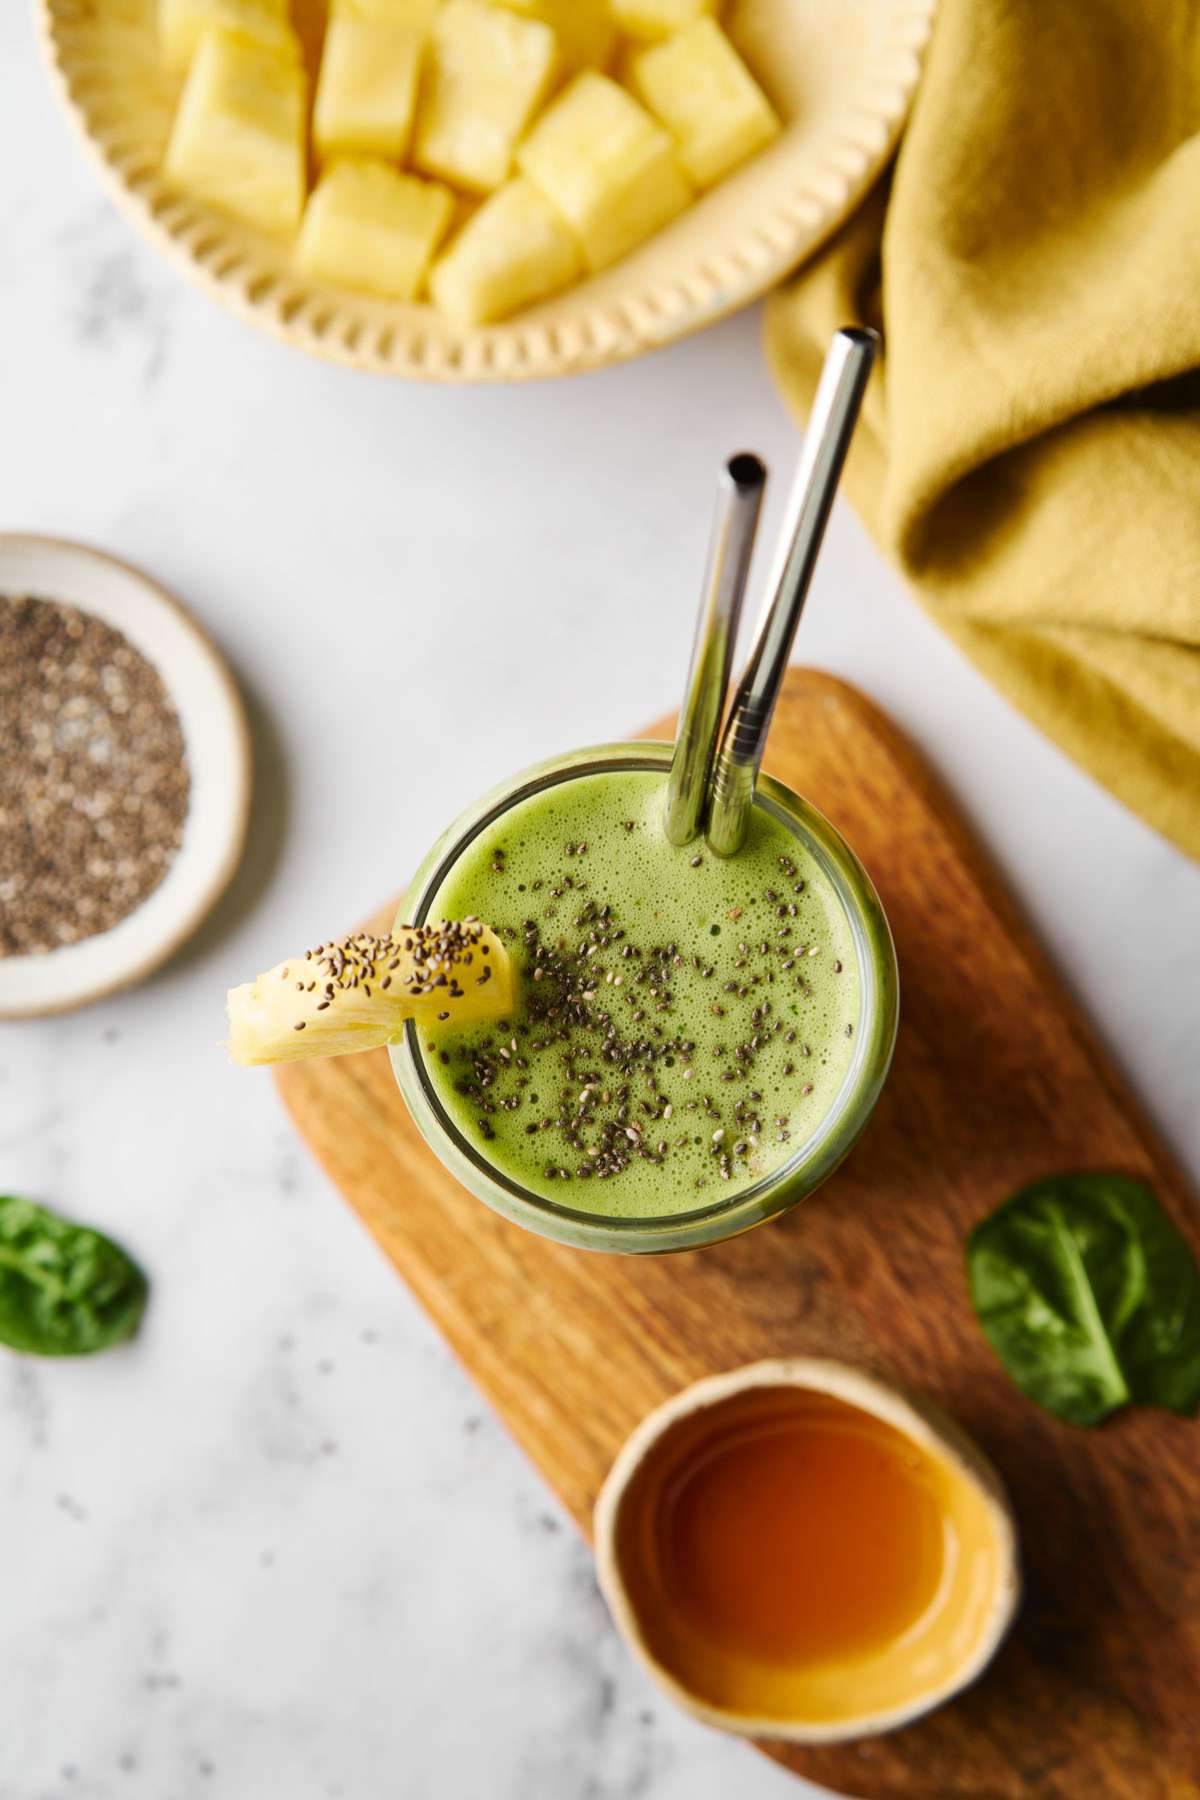 An overhead view of a green smoothie garnished with chia seeds and pineapple.